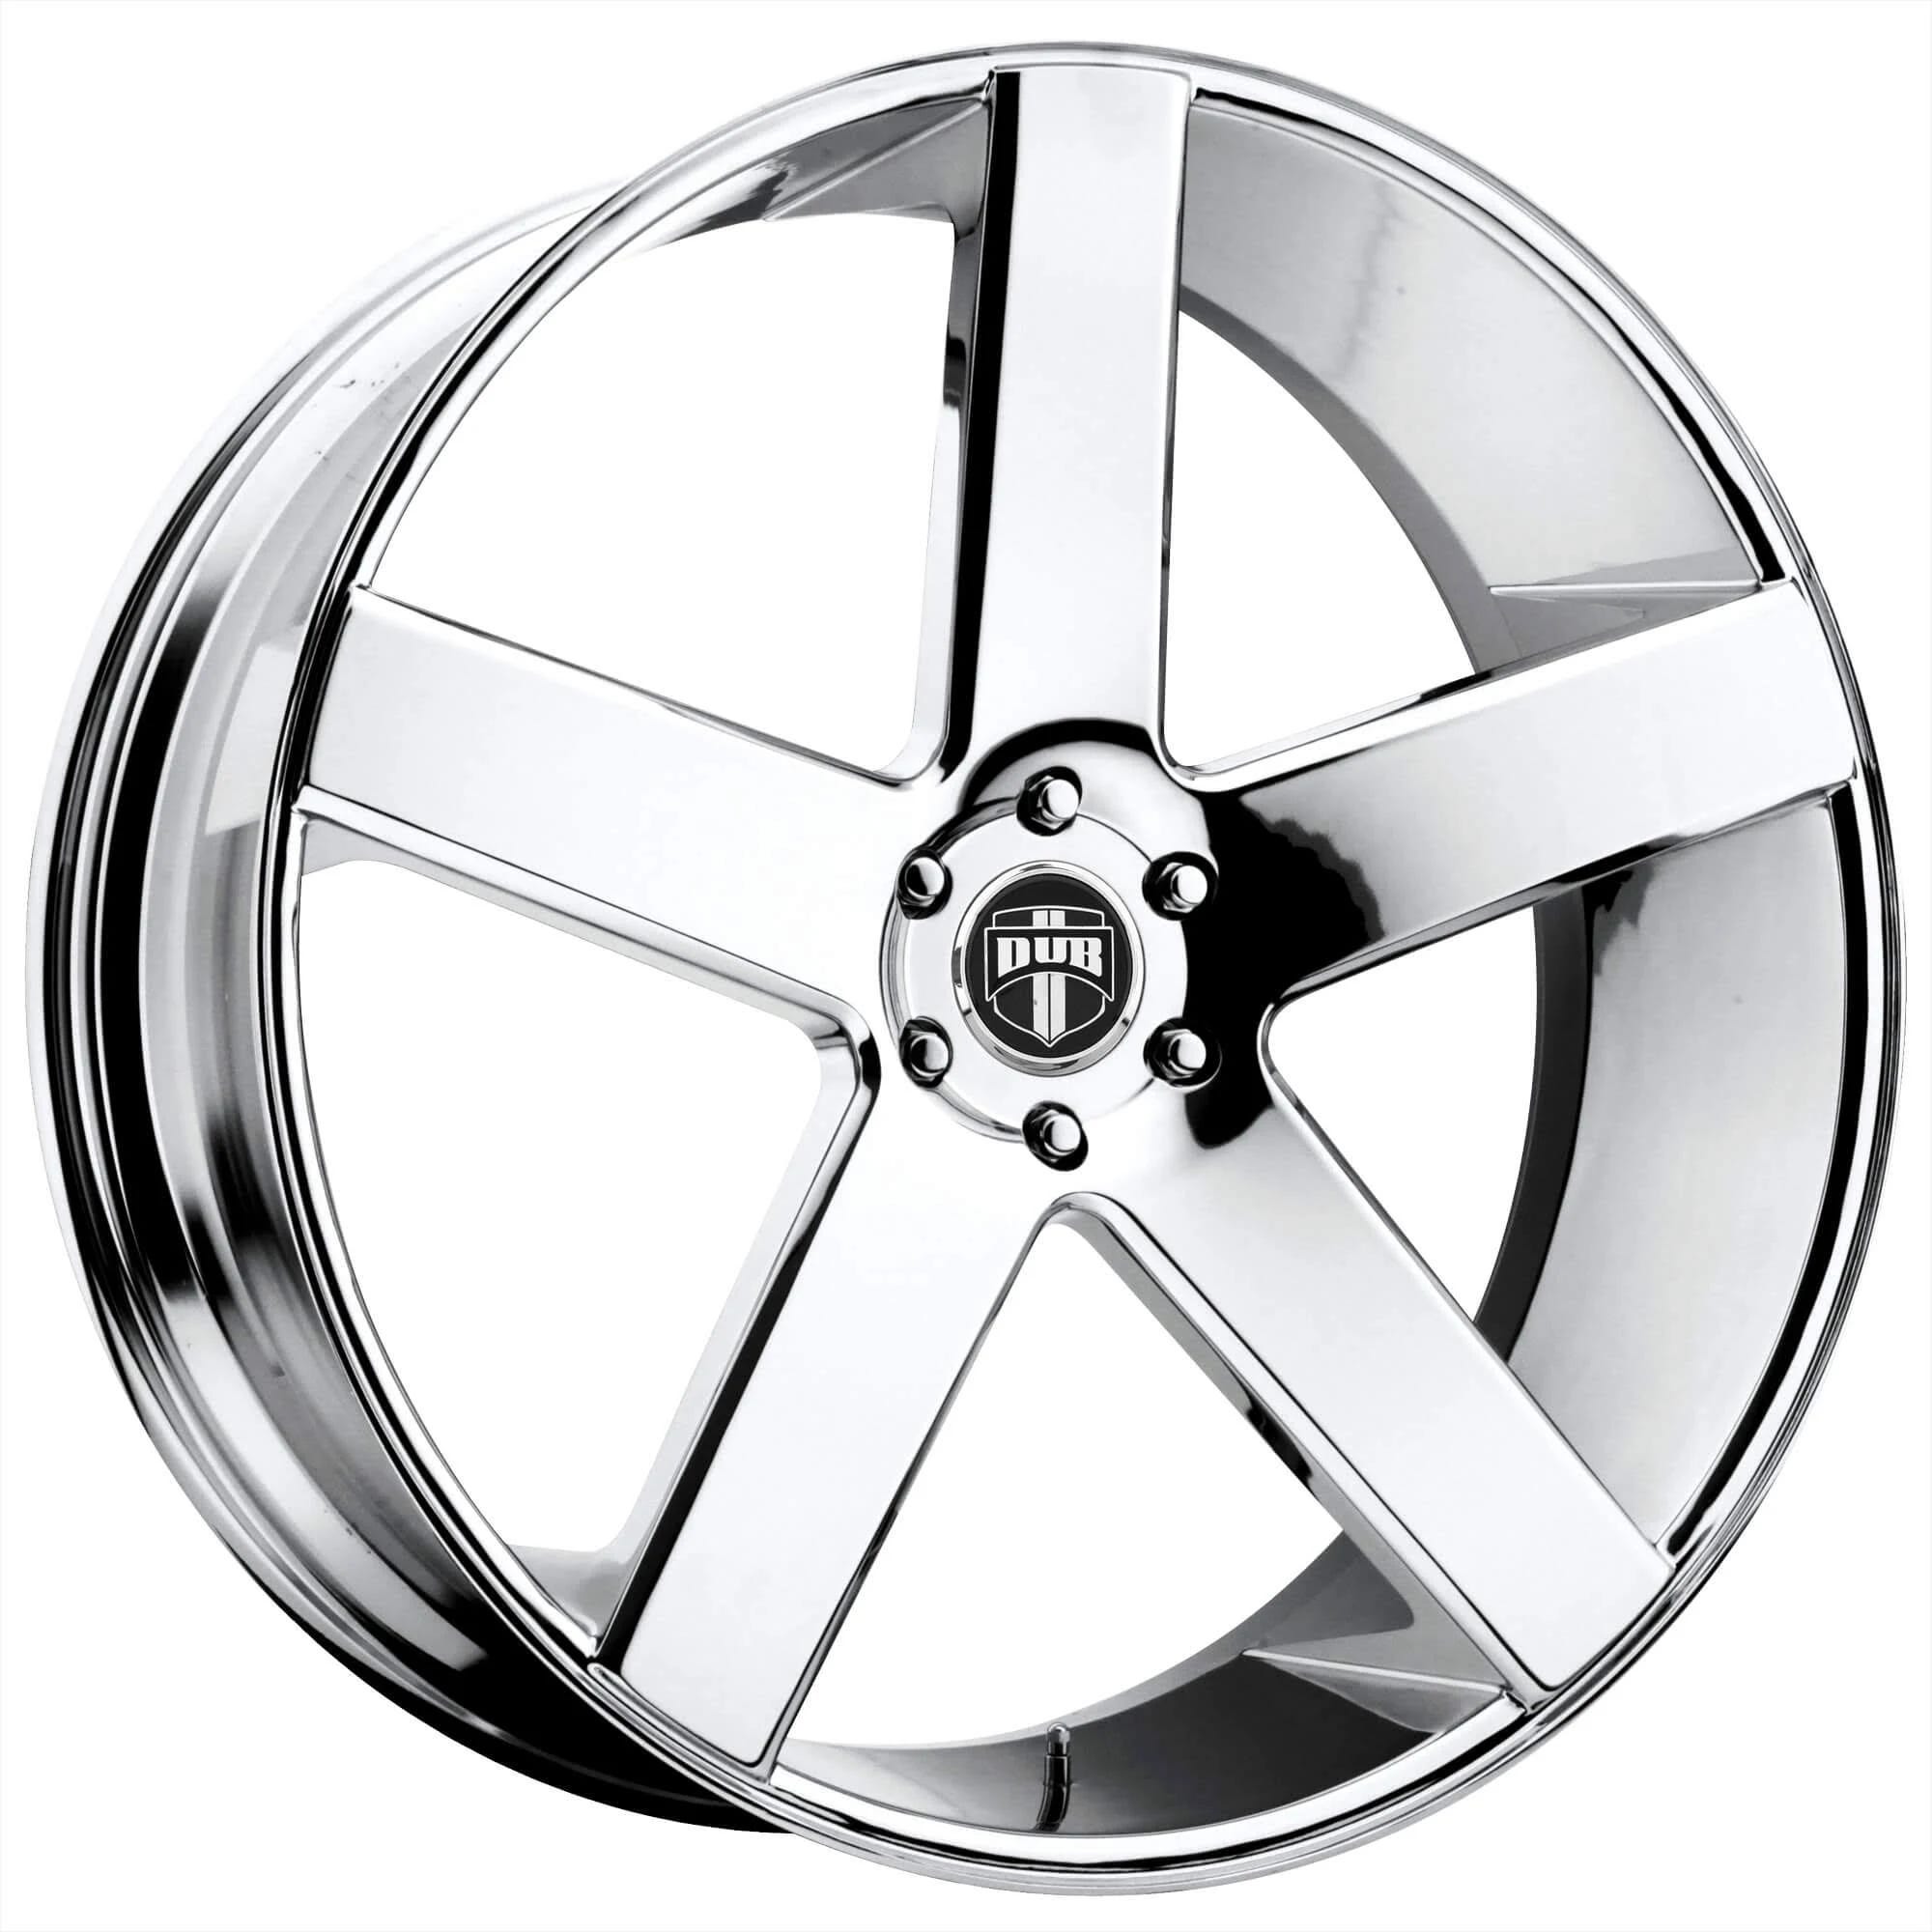 High-Quality Chrome Wheels by Dub for 22 Inch Rims | Image